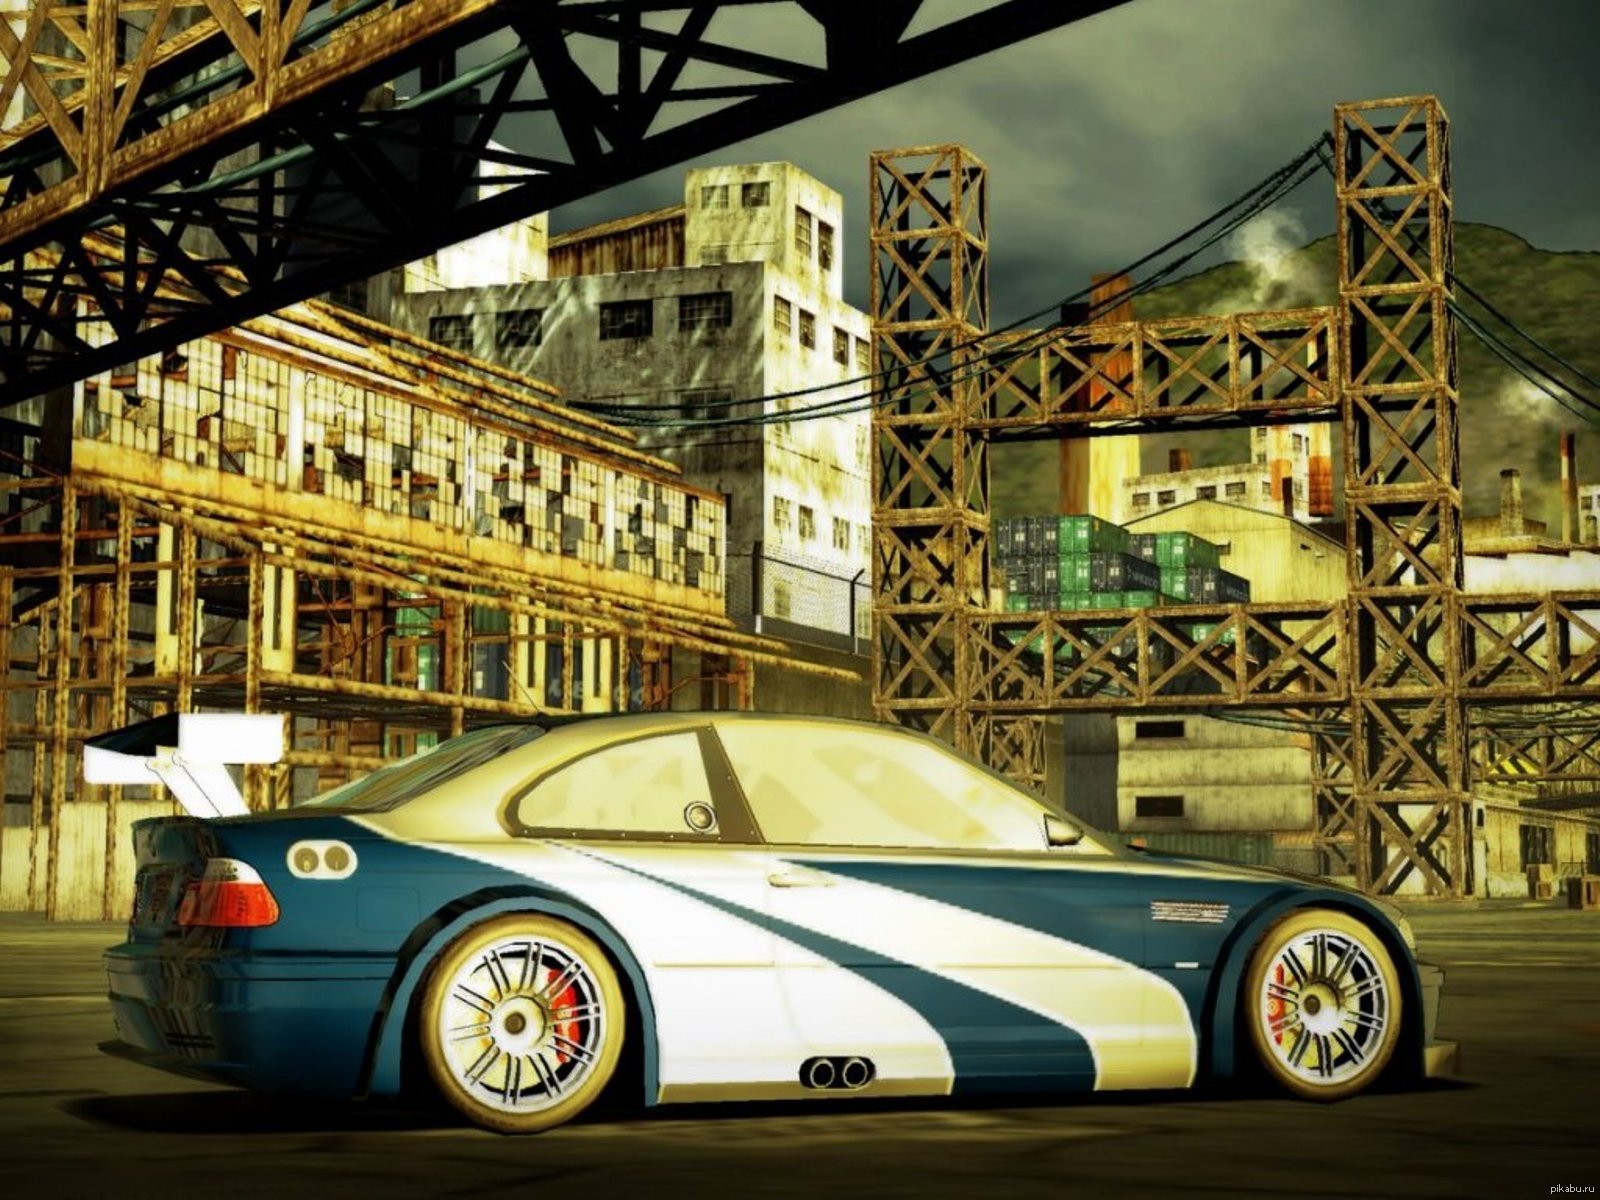 Nfs mw cars. Need for Speed most wanted 2005. Нфс мост вантед 2005. Need for Speed mostwanted. Нфс мост Лондон.